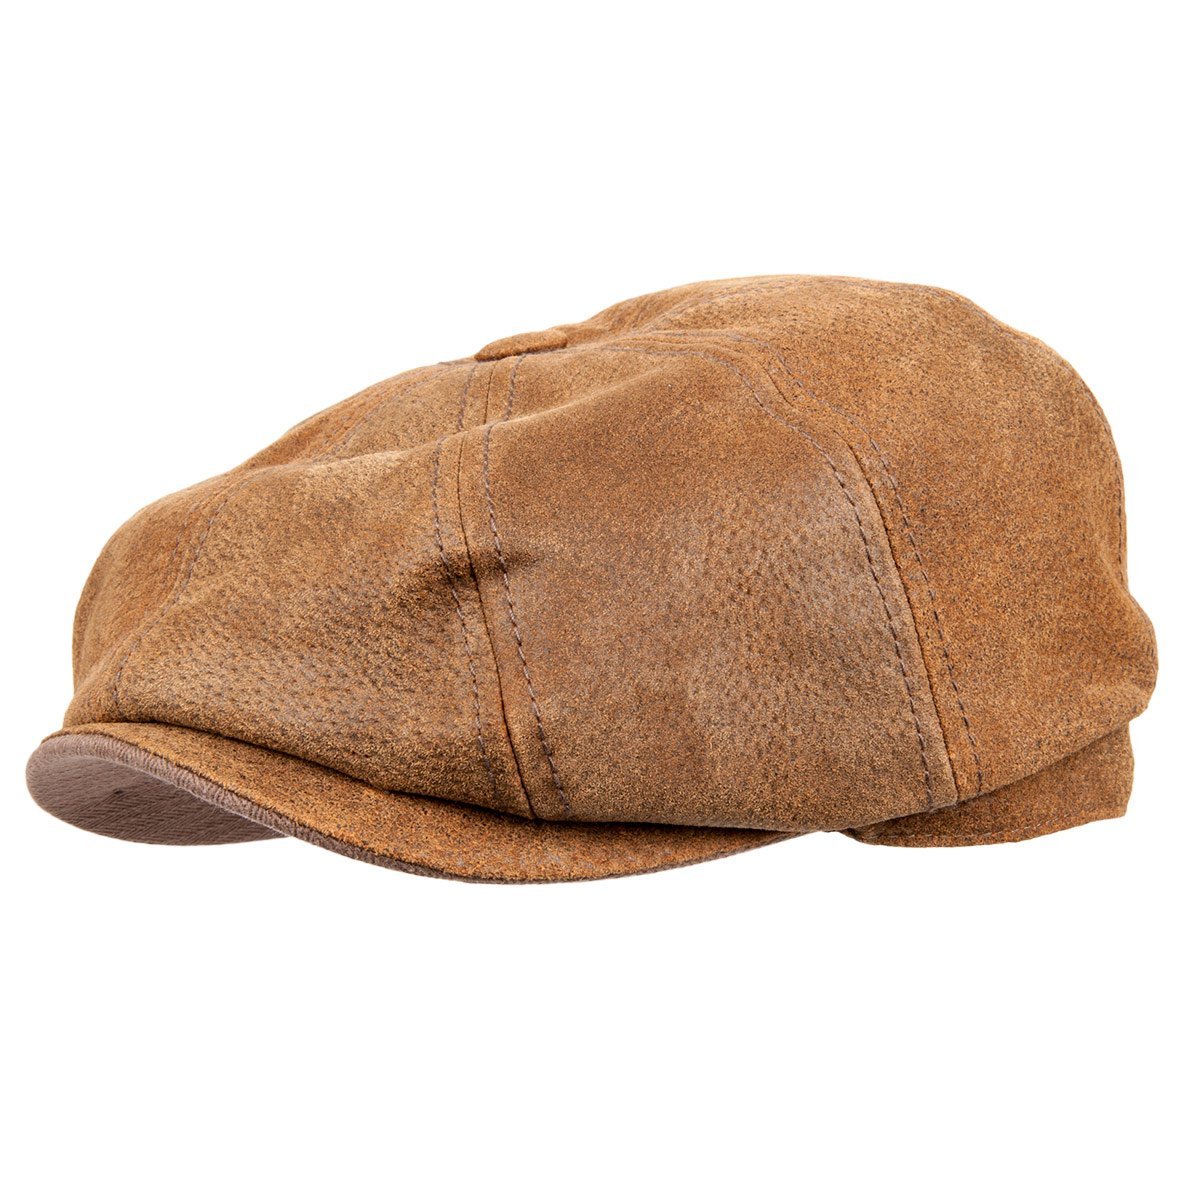 Flat cap in pure leather by Stetson